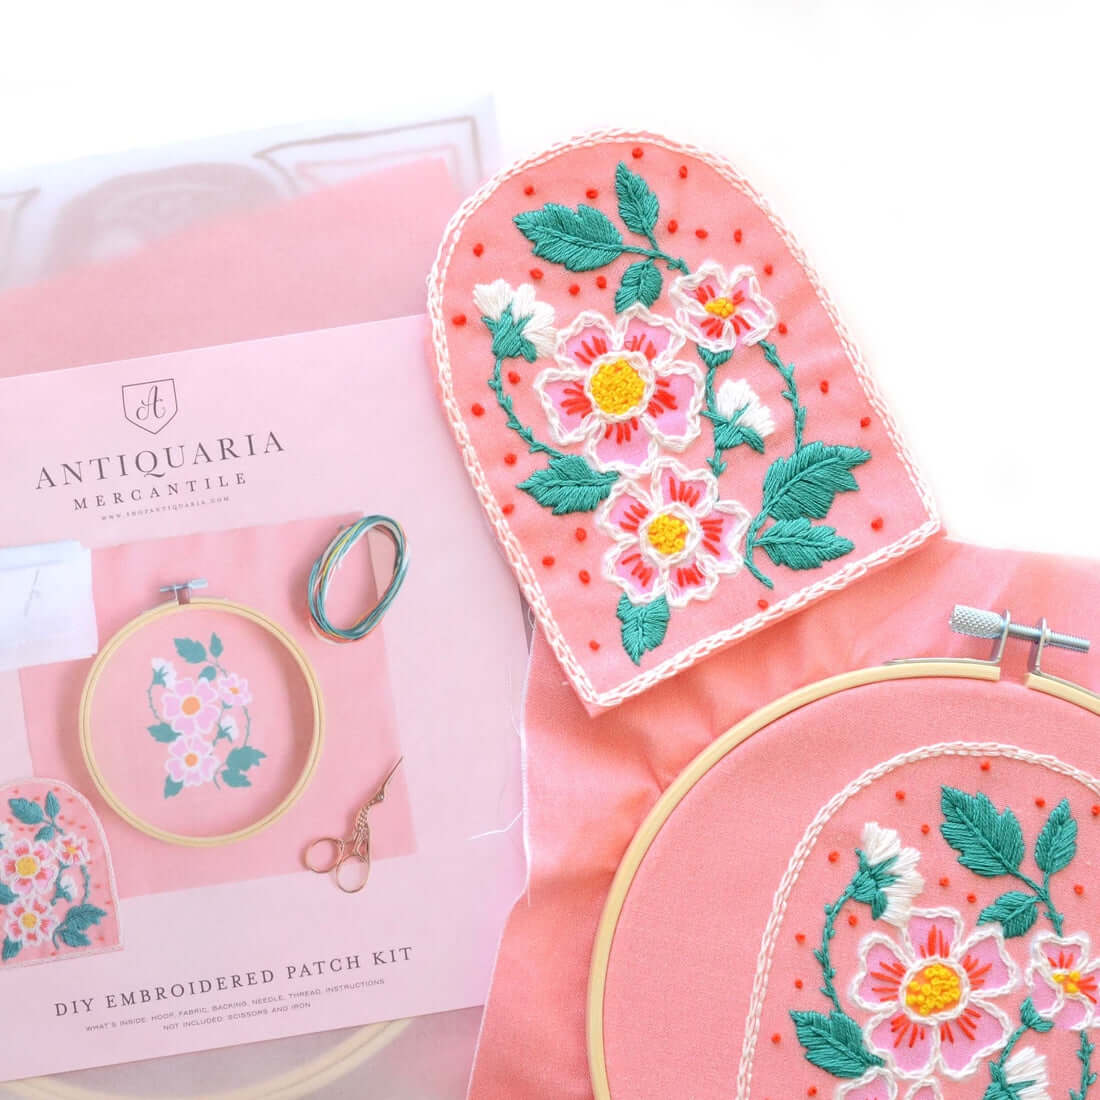 How to make a hand embroidered patch with flowers DIY kit